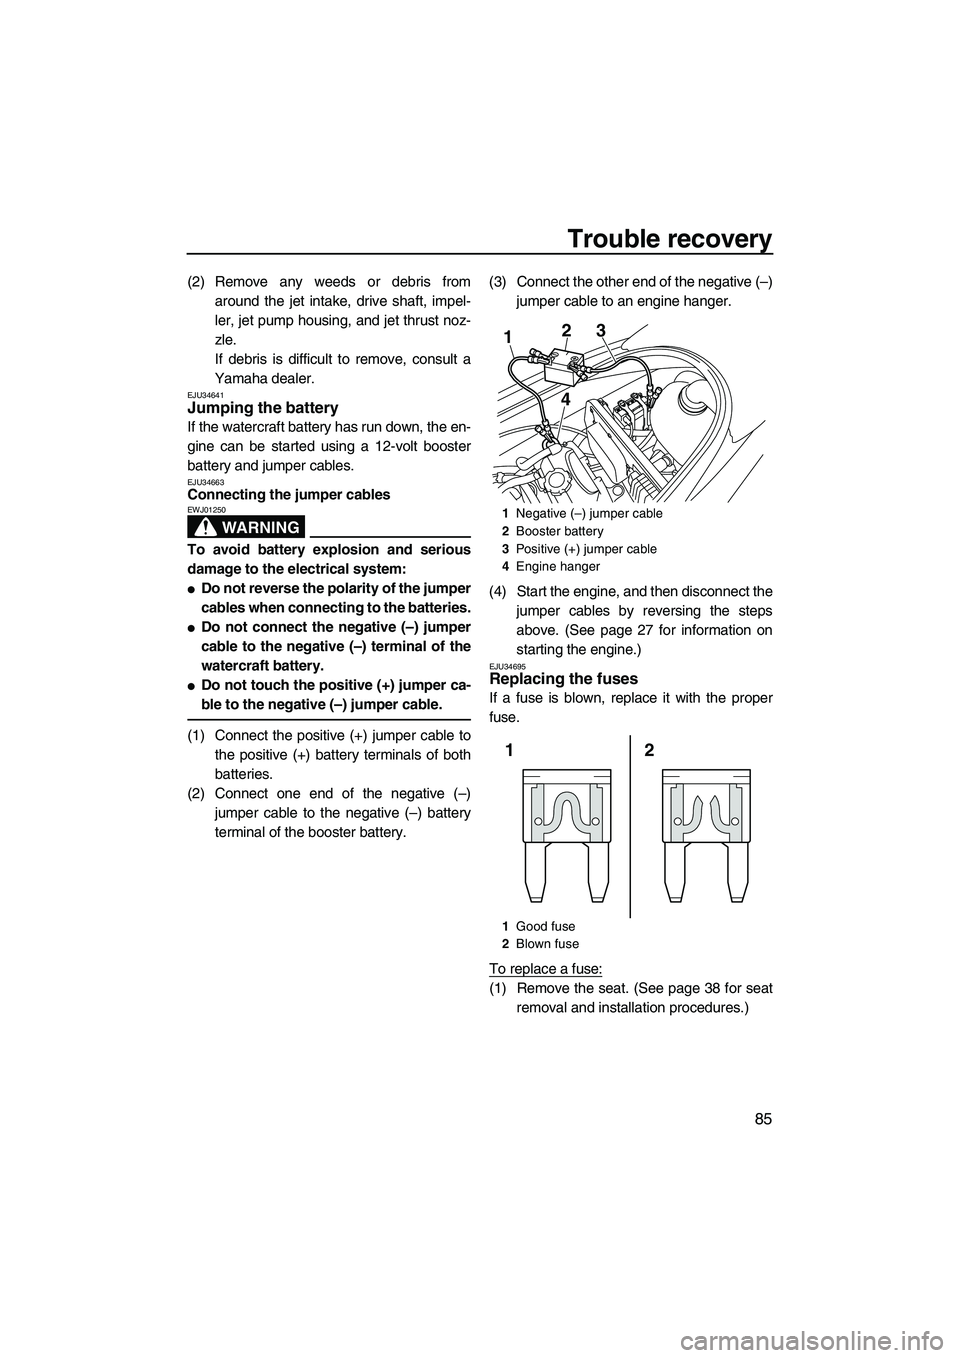 YAMAHA VX DELUXE 2013  Owners Manual Trouble recovery
85
(2) Remove any weeds or debris fromaround the jet intake, drive shaft, impel-
ler, jet pump housing, and jet thrust noz-
zle.
If debris is difficult to remove, consult a
Yamaha dea